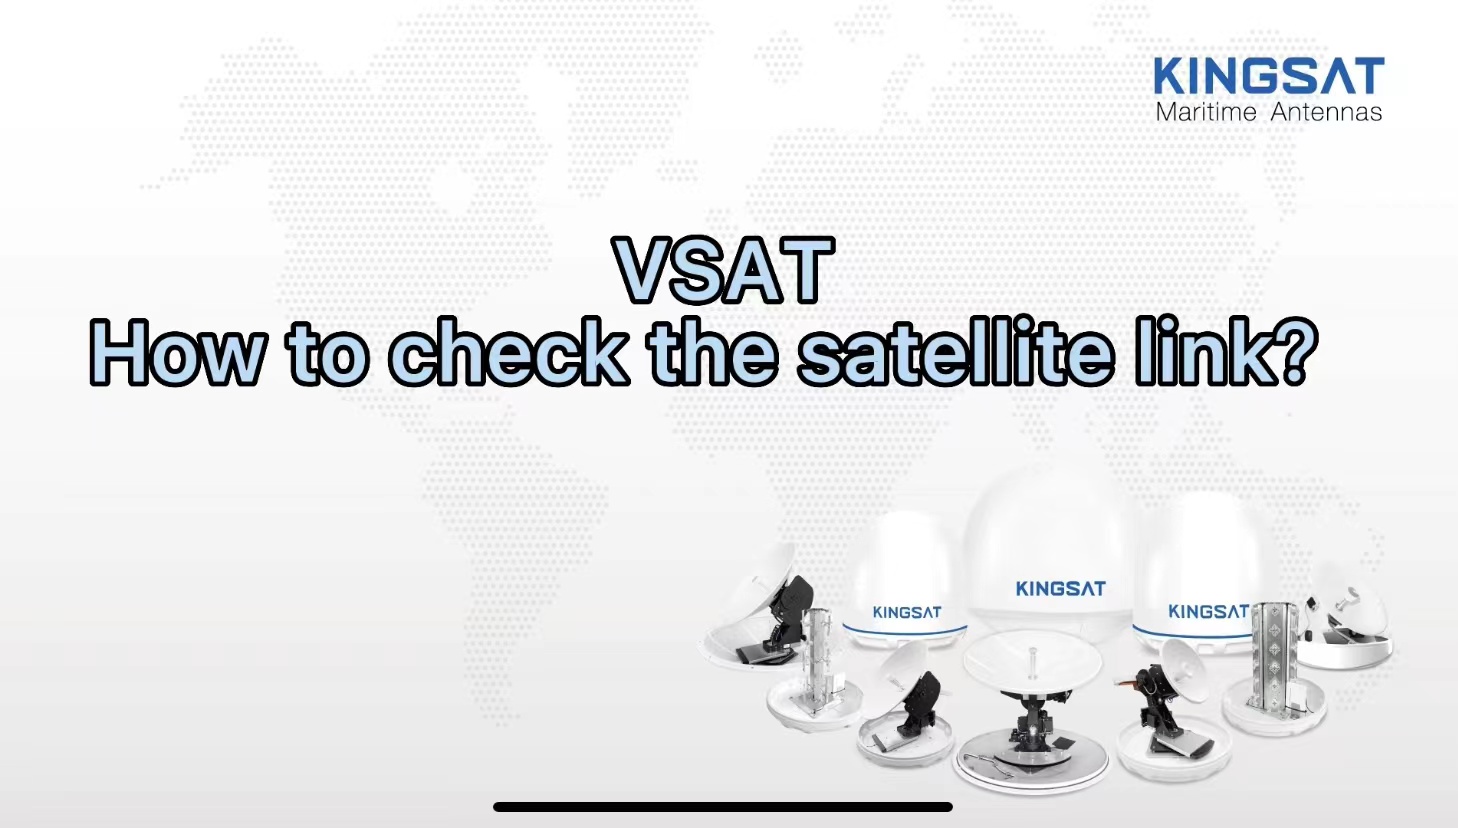 How to check the satellite link?